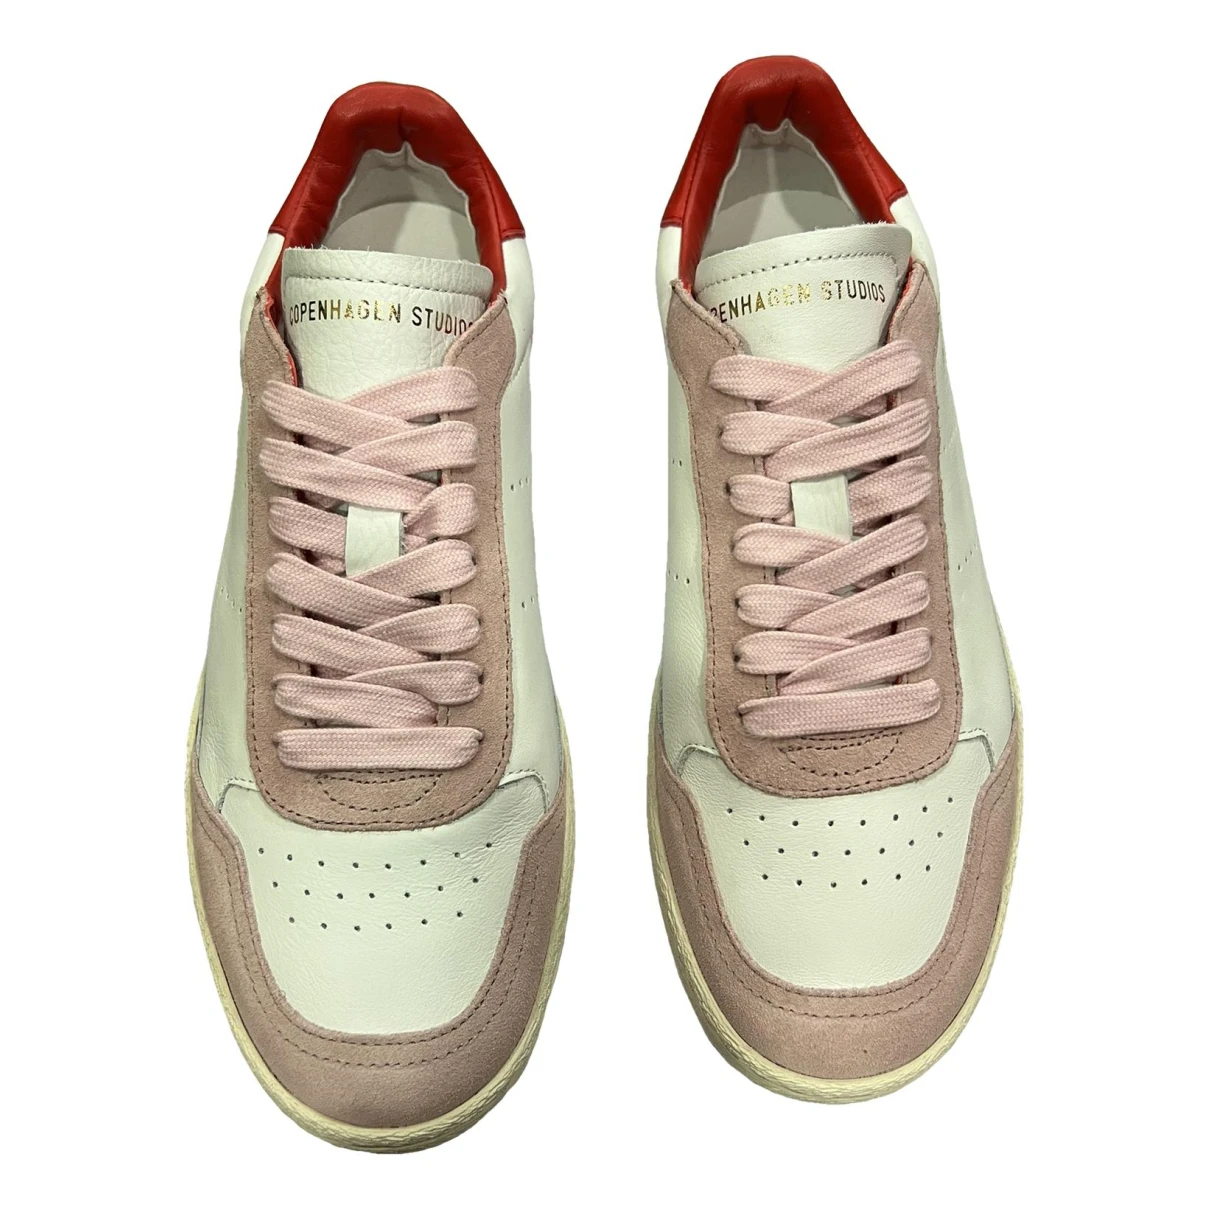 Pre-owned Copenhagen Studios Leather Trainers In Other